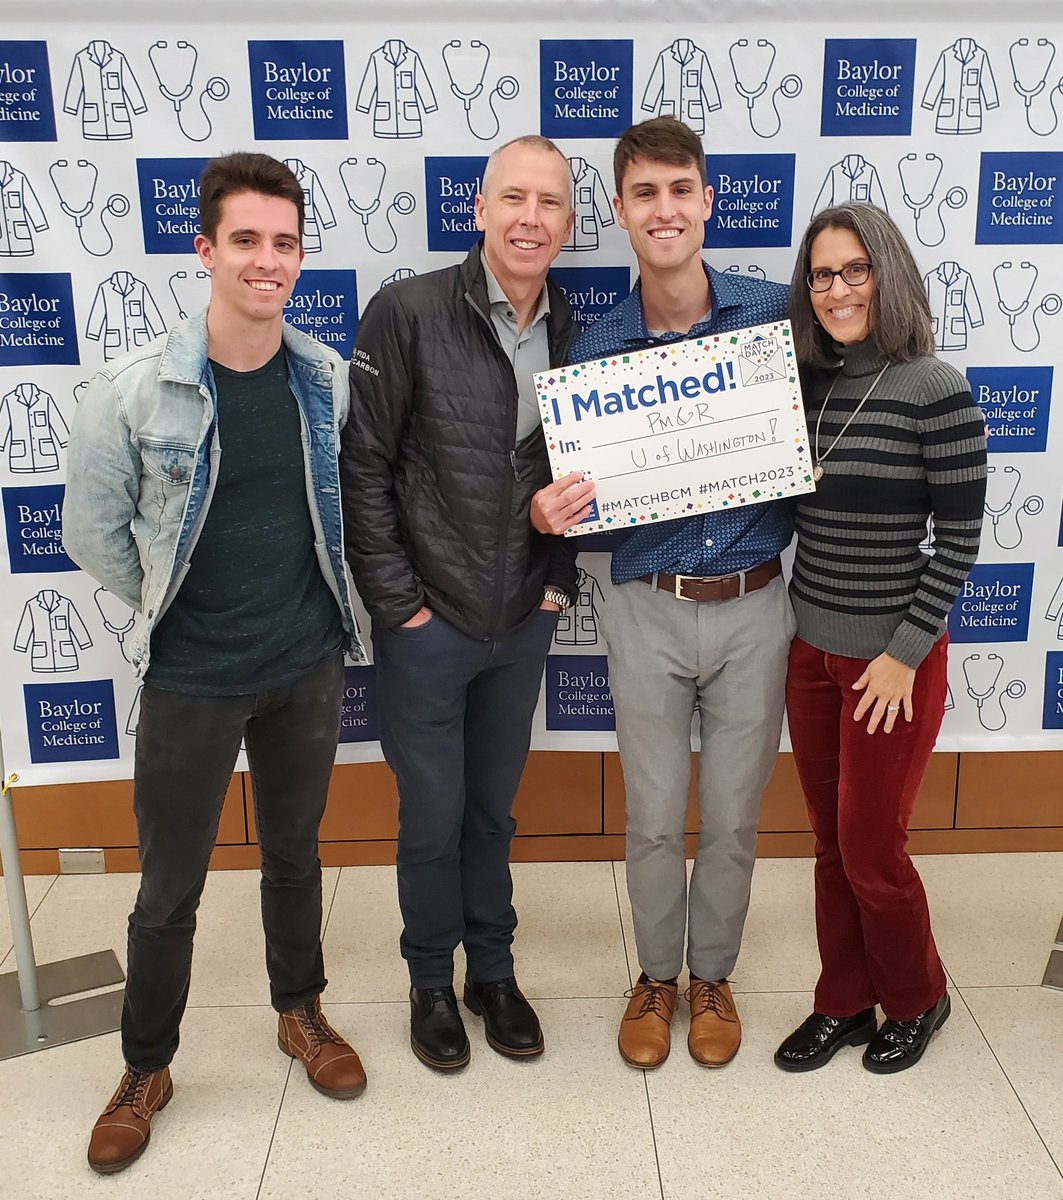 Congratulations, Aden! Exciting times ahead for you and your classmates. Looking forward to graduation! ❤️🩺
#MatchBCM #Match2023 #MatchDay
@bcmhouston @UW @UWRehabMed #medtwitter #doctor #physiatry #rehabmedicine #PMR